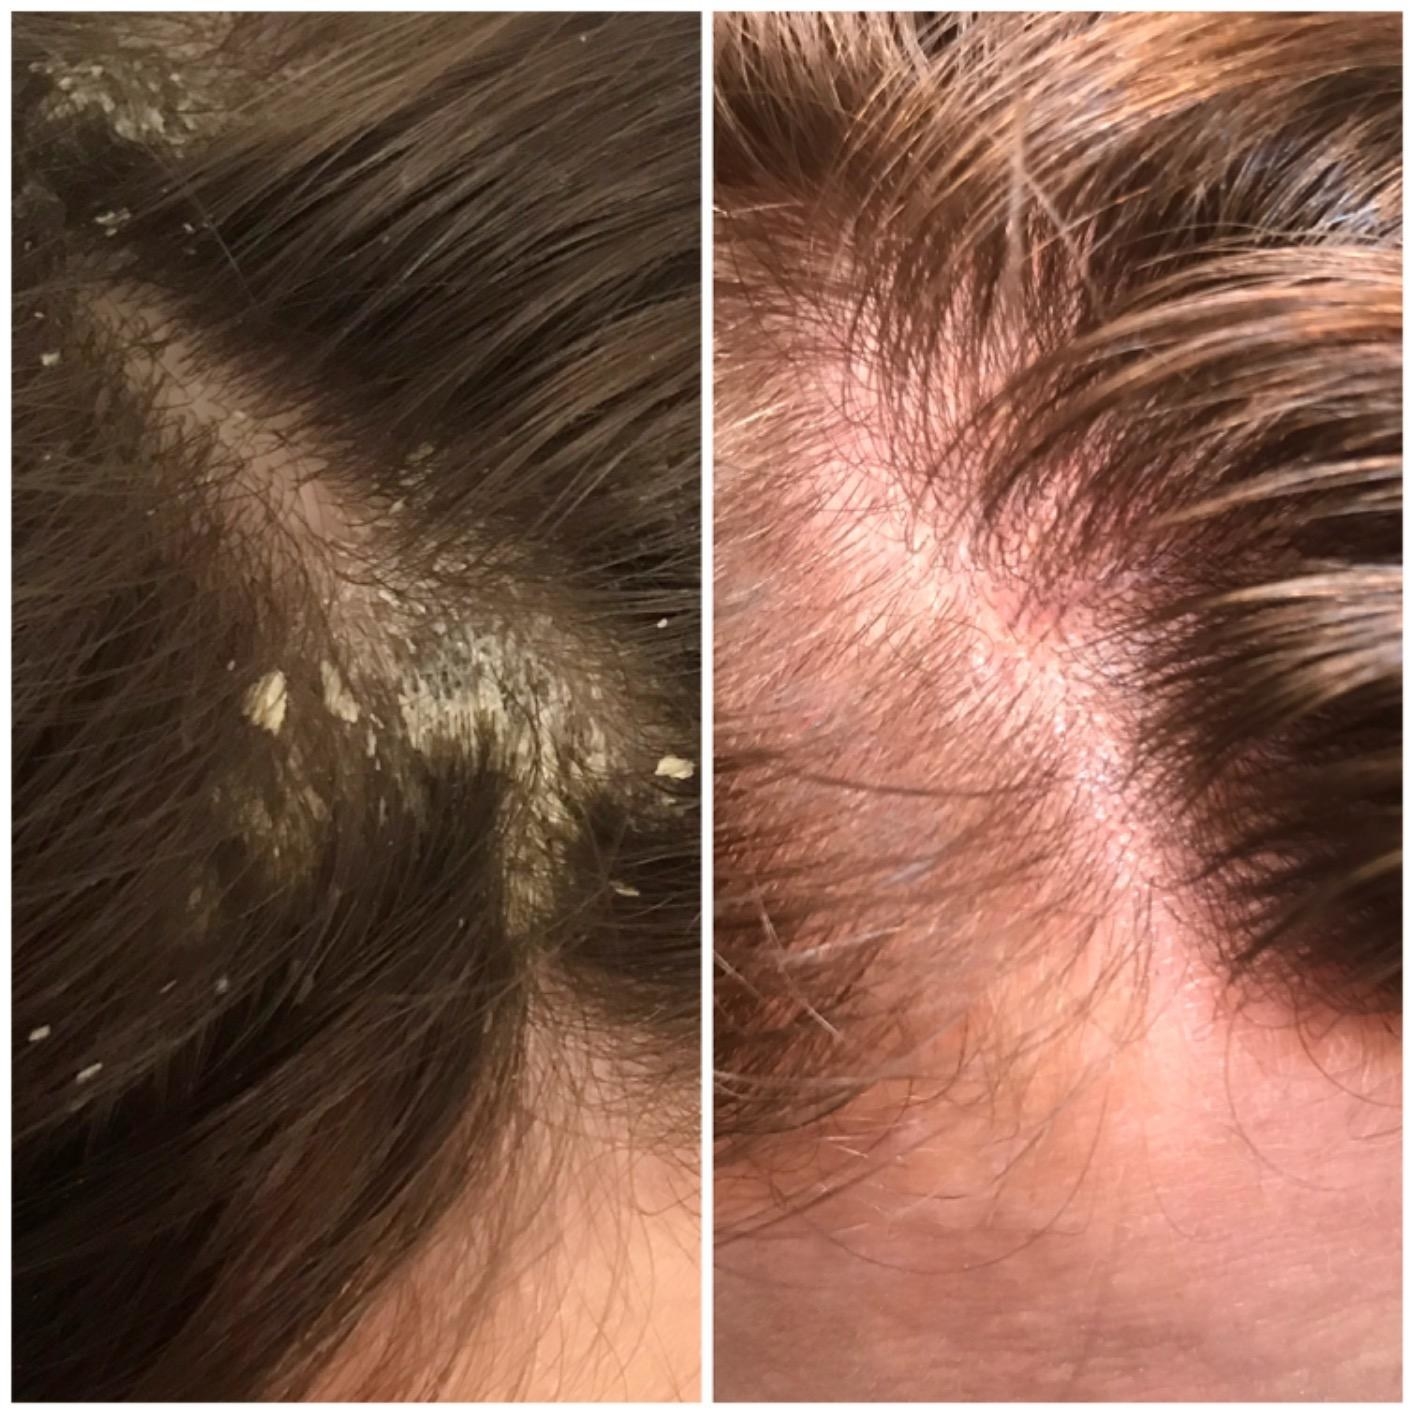 on the left a closeup of a scalp with brown hair and a lot of dandruff and on the right the same scalp with no dandruff